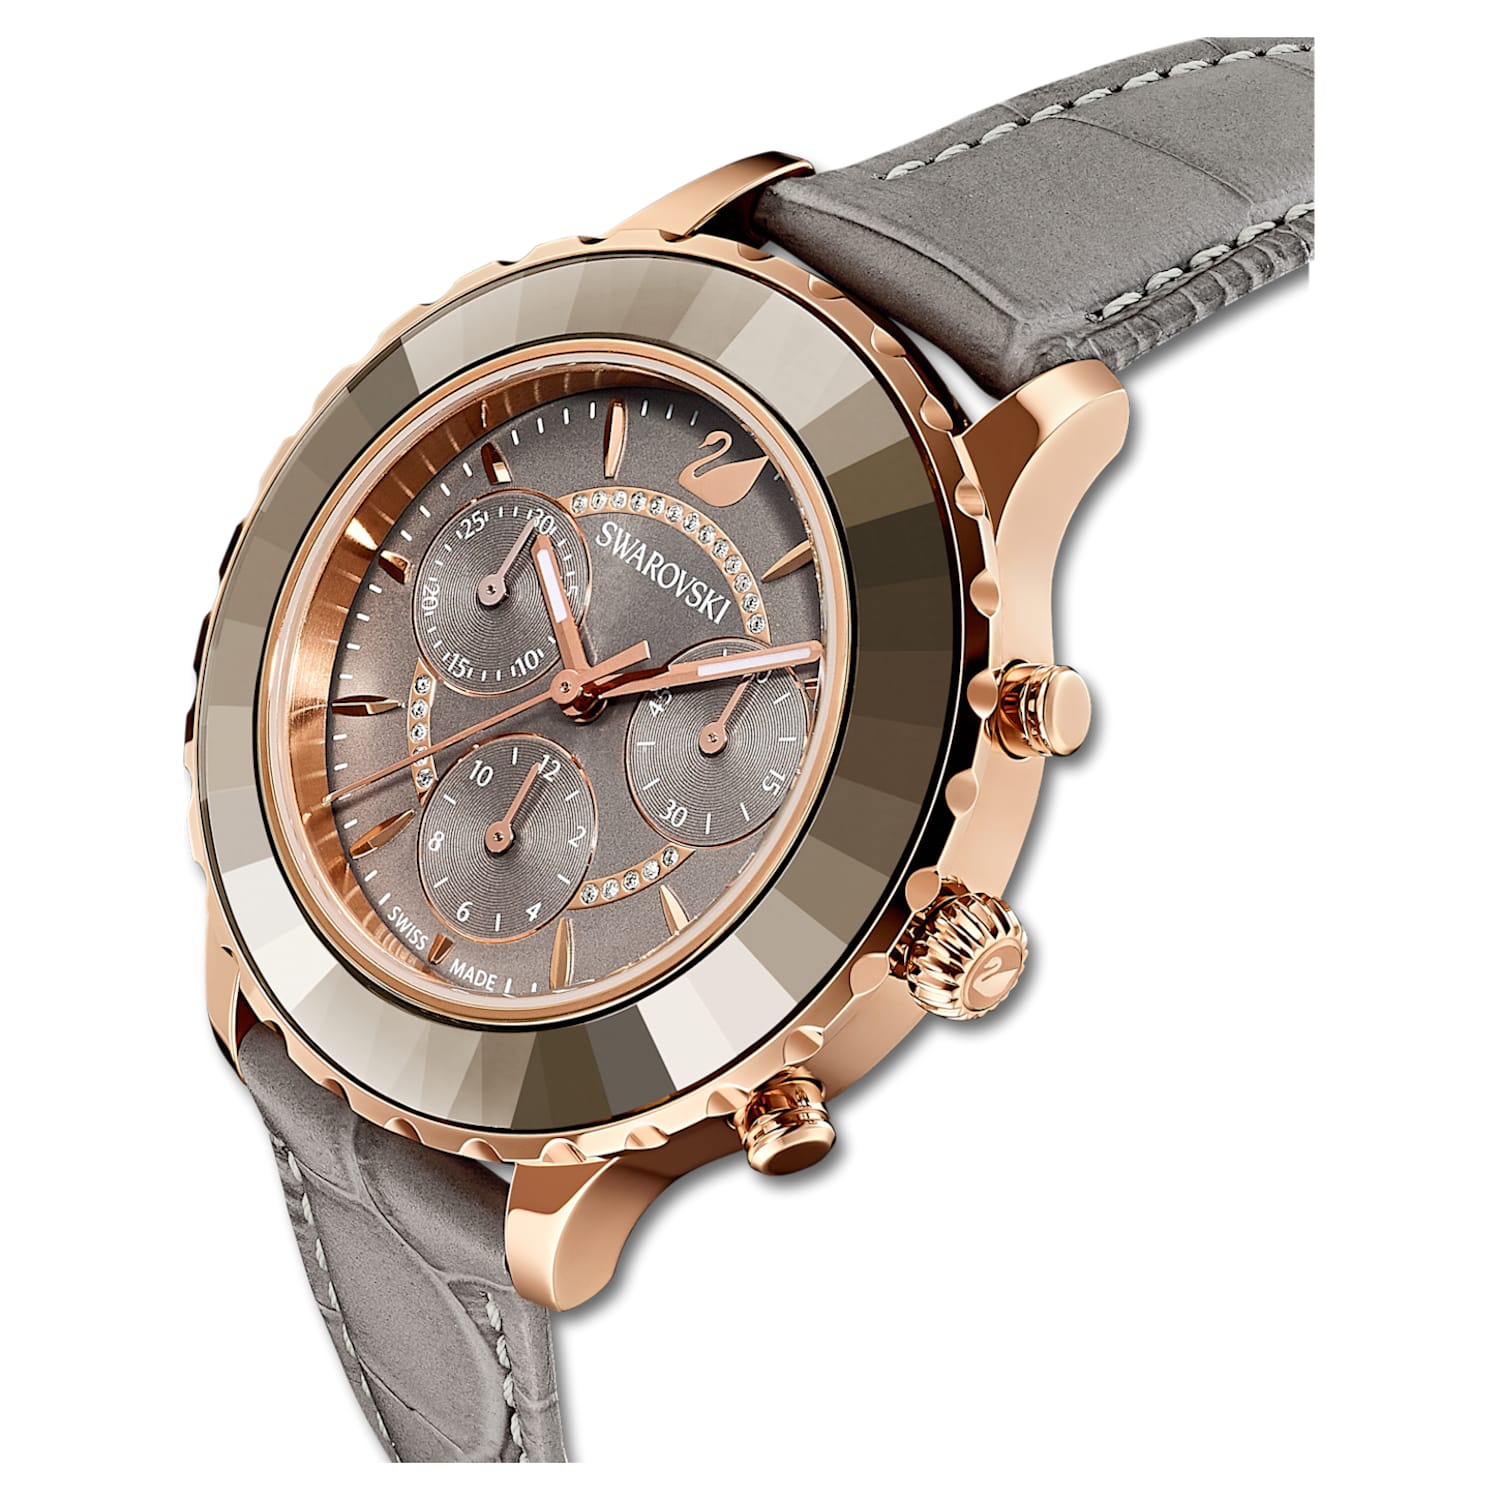 Octea Lux Chrono watch, Swiss Made, Leather strap, Gray, Rose gold